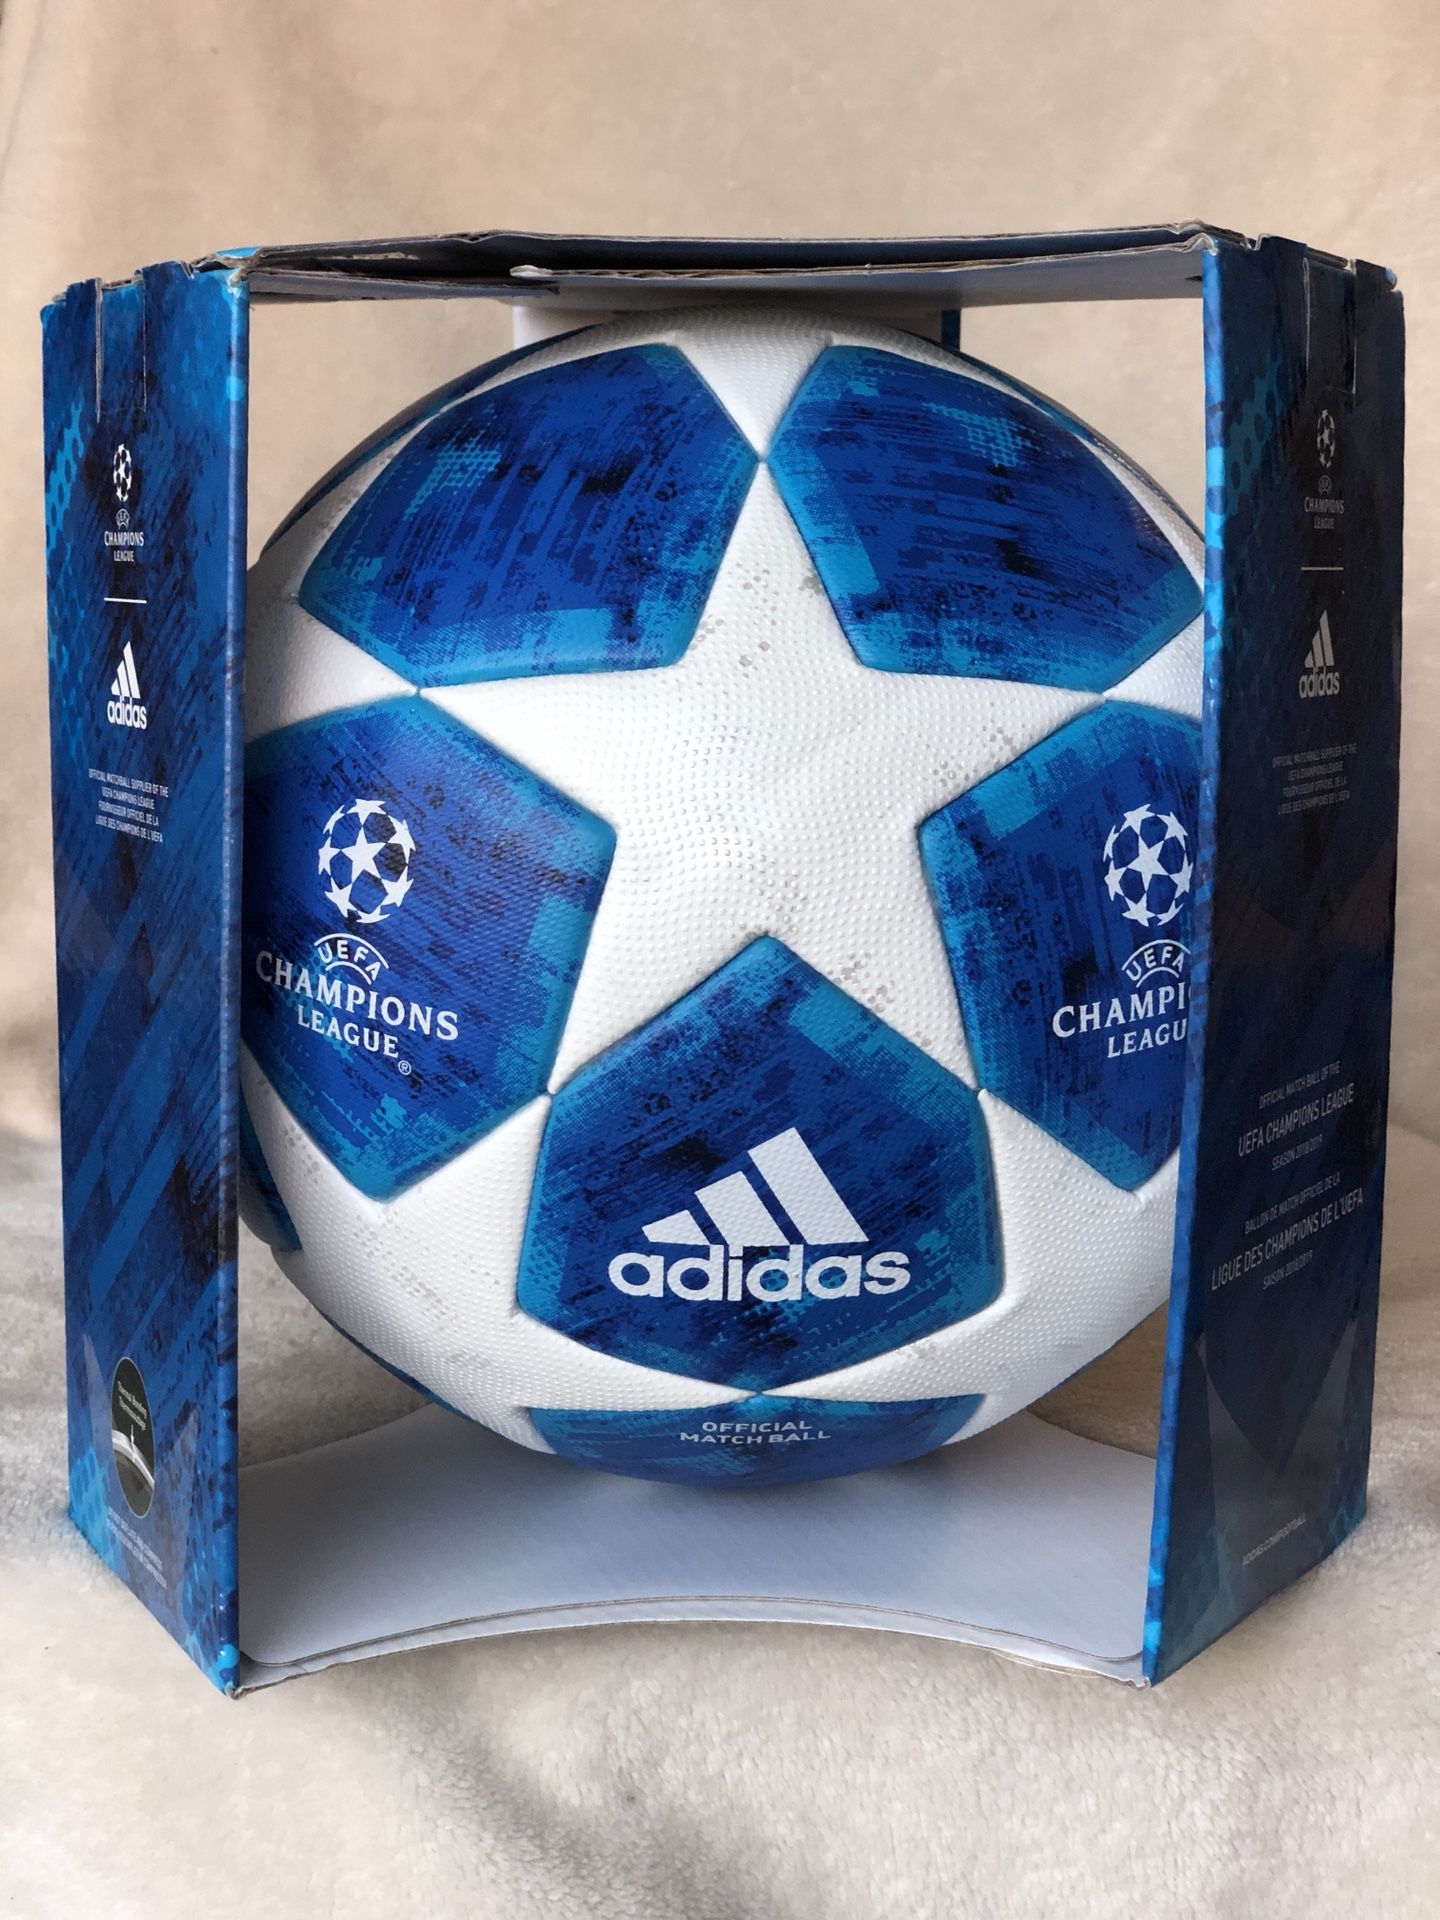 Adidas UEFA Champions Legue 2018/19 Official Match Ball - Balón Official de  la Champions League NEW WITH BOX for Sale in Los Angeles, CA - OfferUp